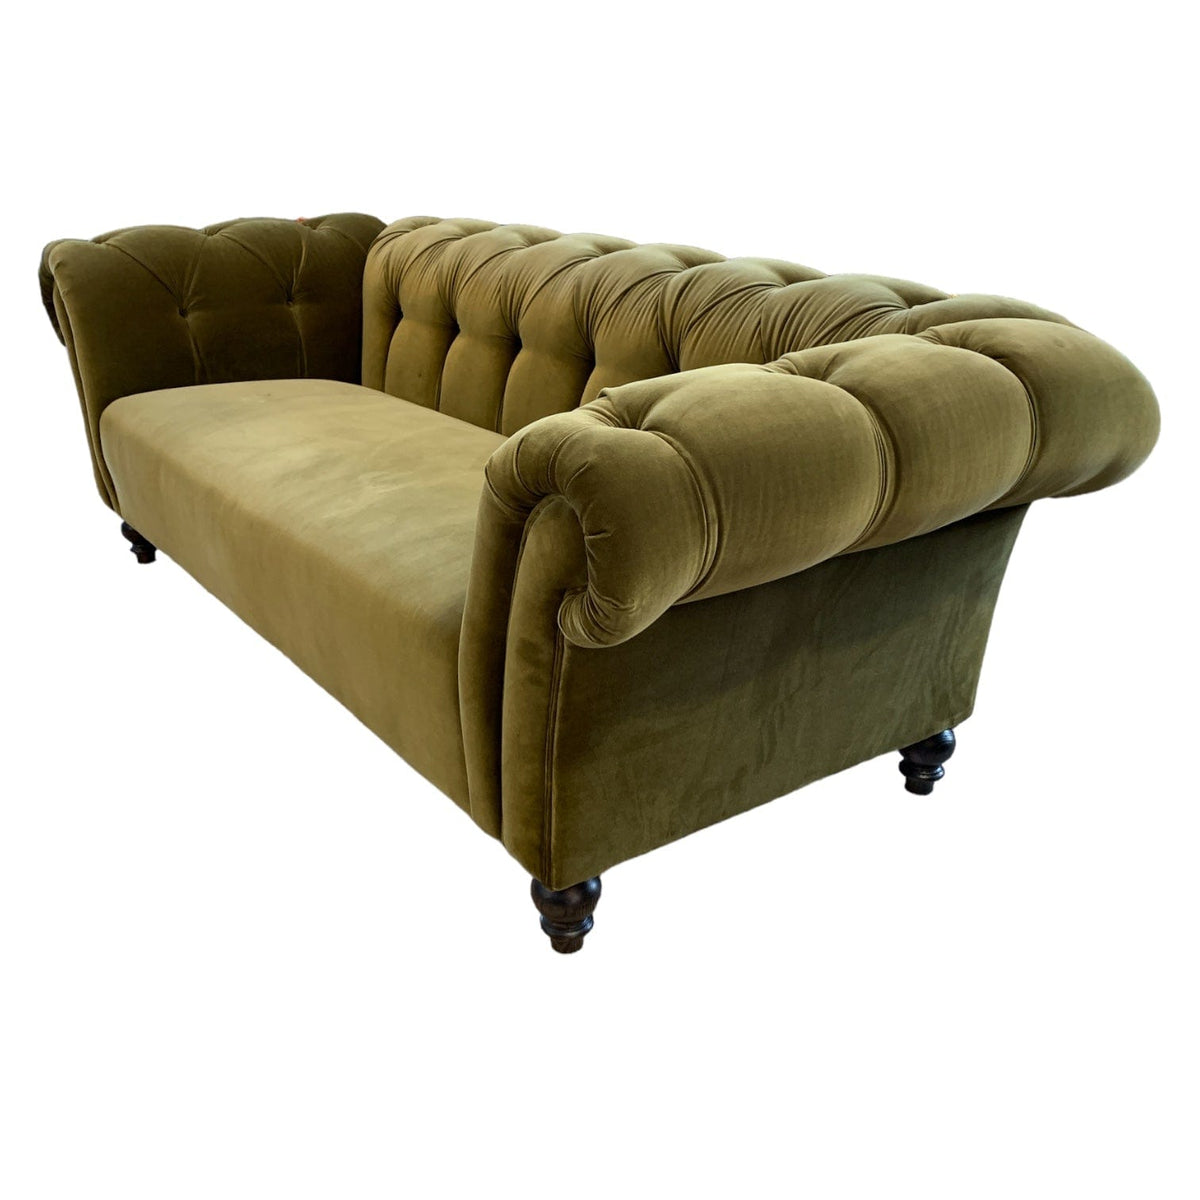 Arthur Olive 3 Seater Chesterfield